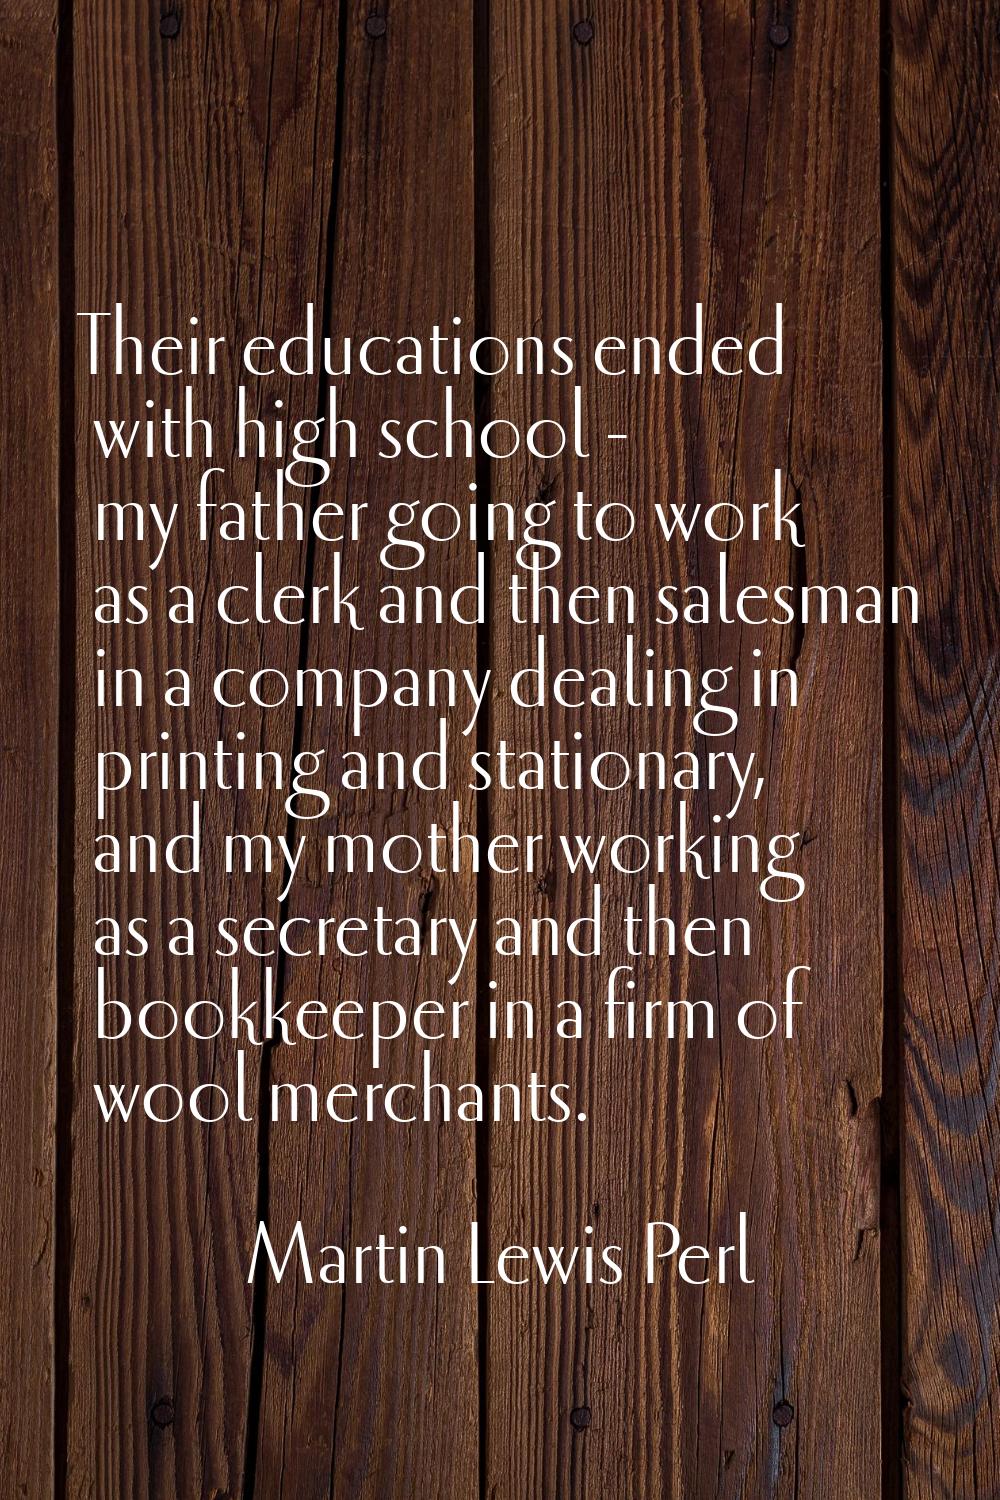 Their educations ended with high school - my father going to work as a clerk and then salesman in a